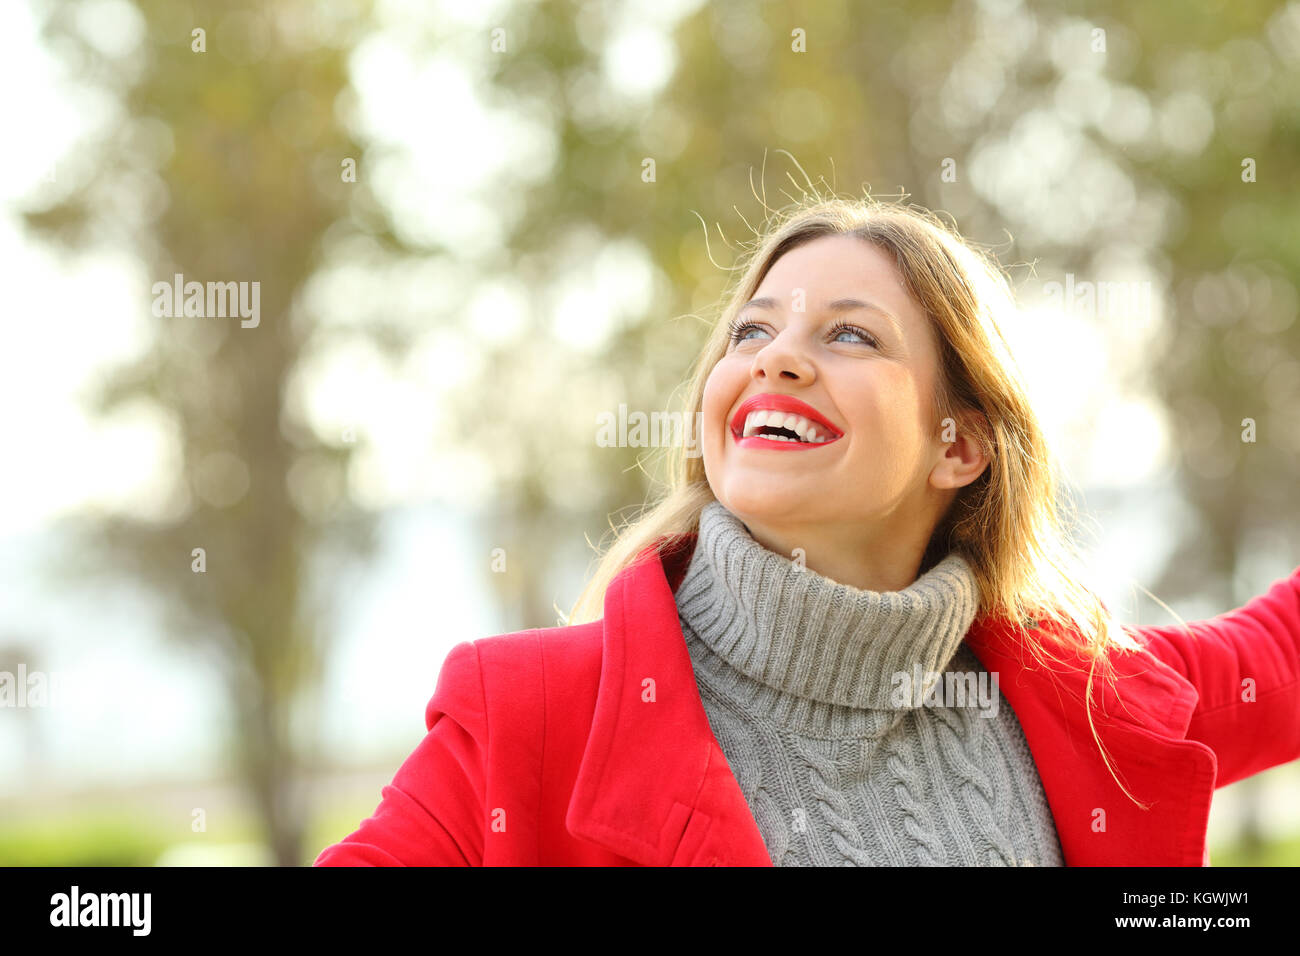 Portrait of a joyful candid girl wearing a red jacket and a sweater joking outdoors in a park in winter Stock Photo